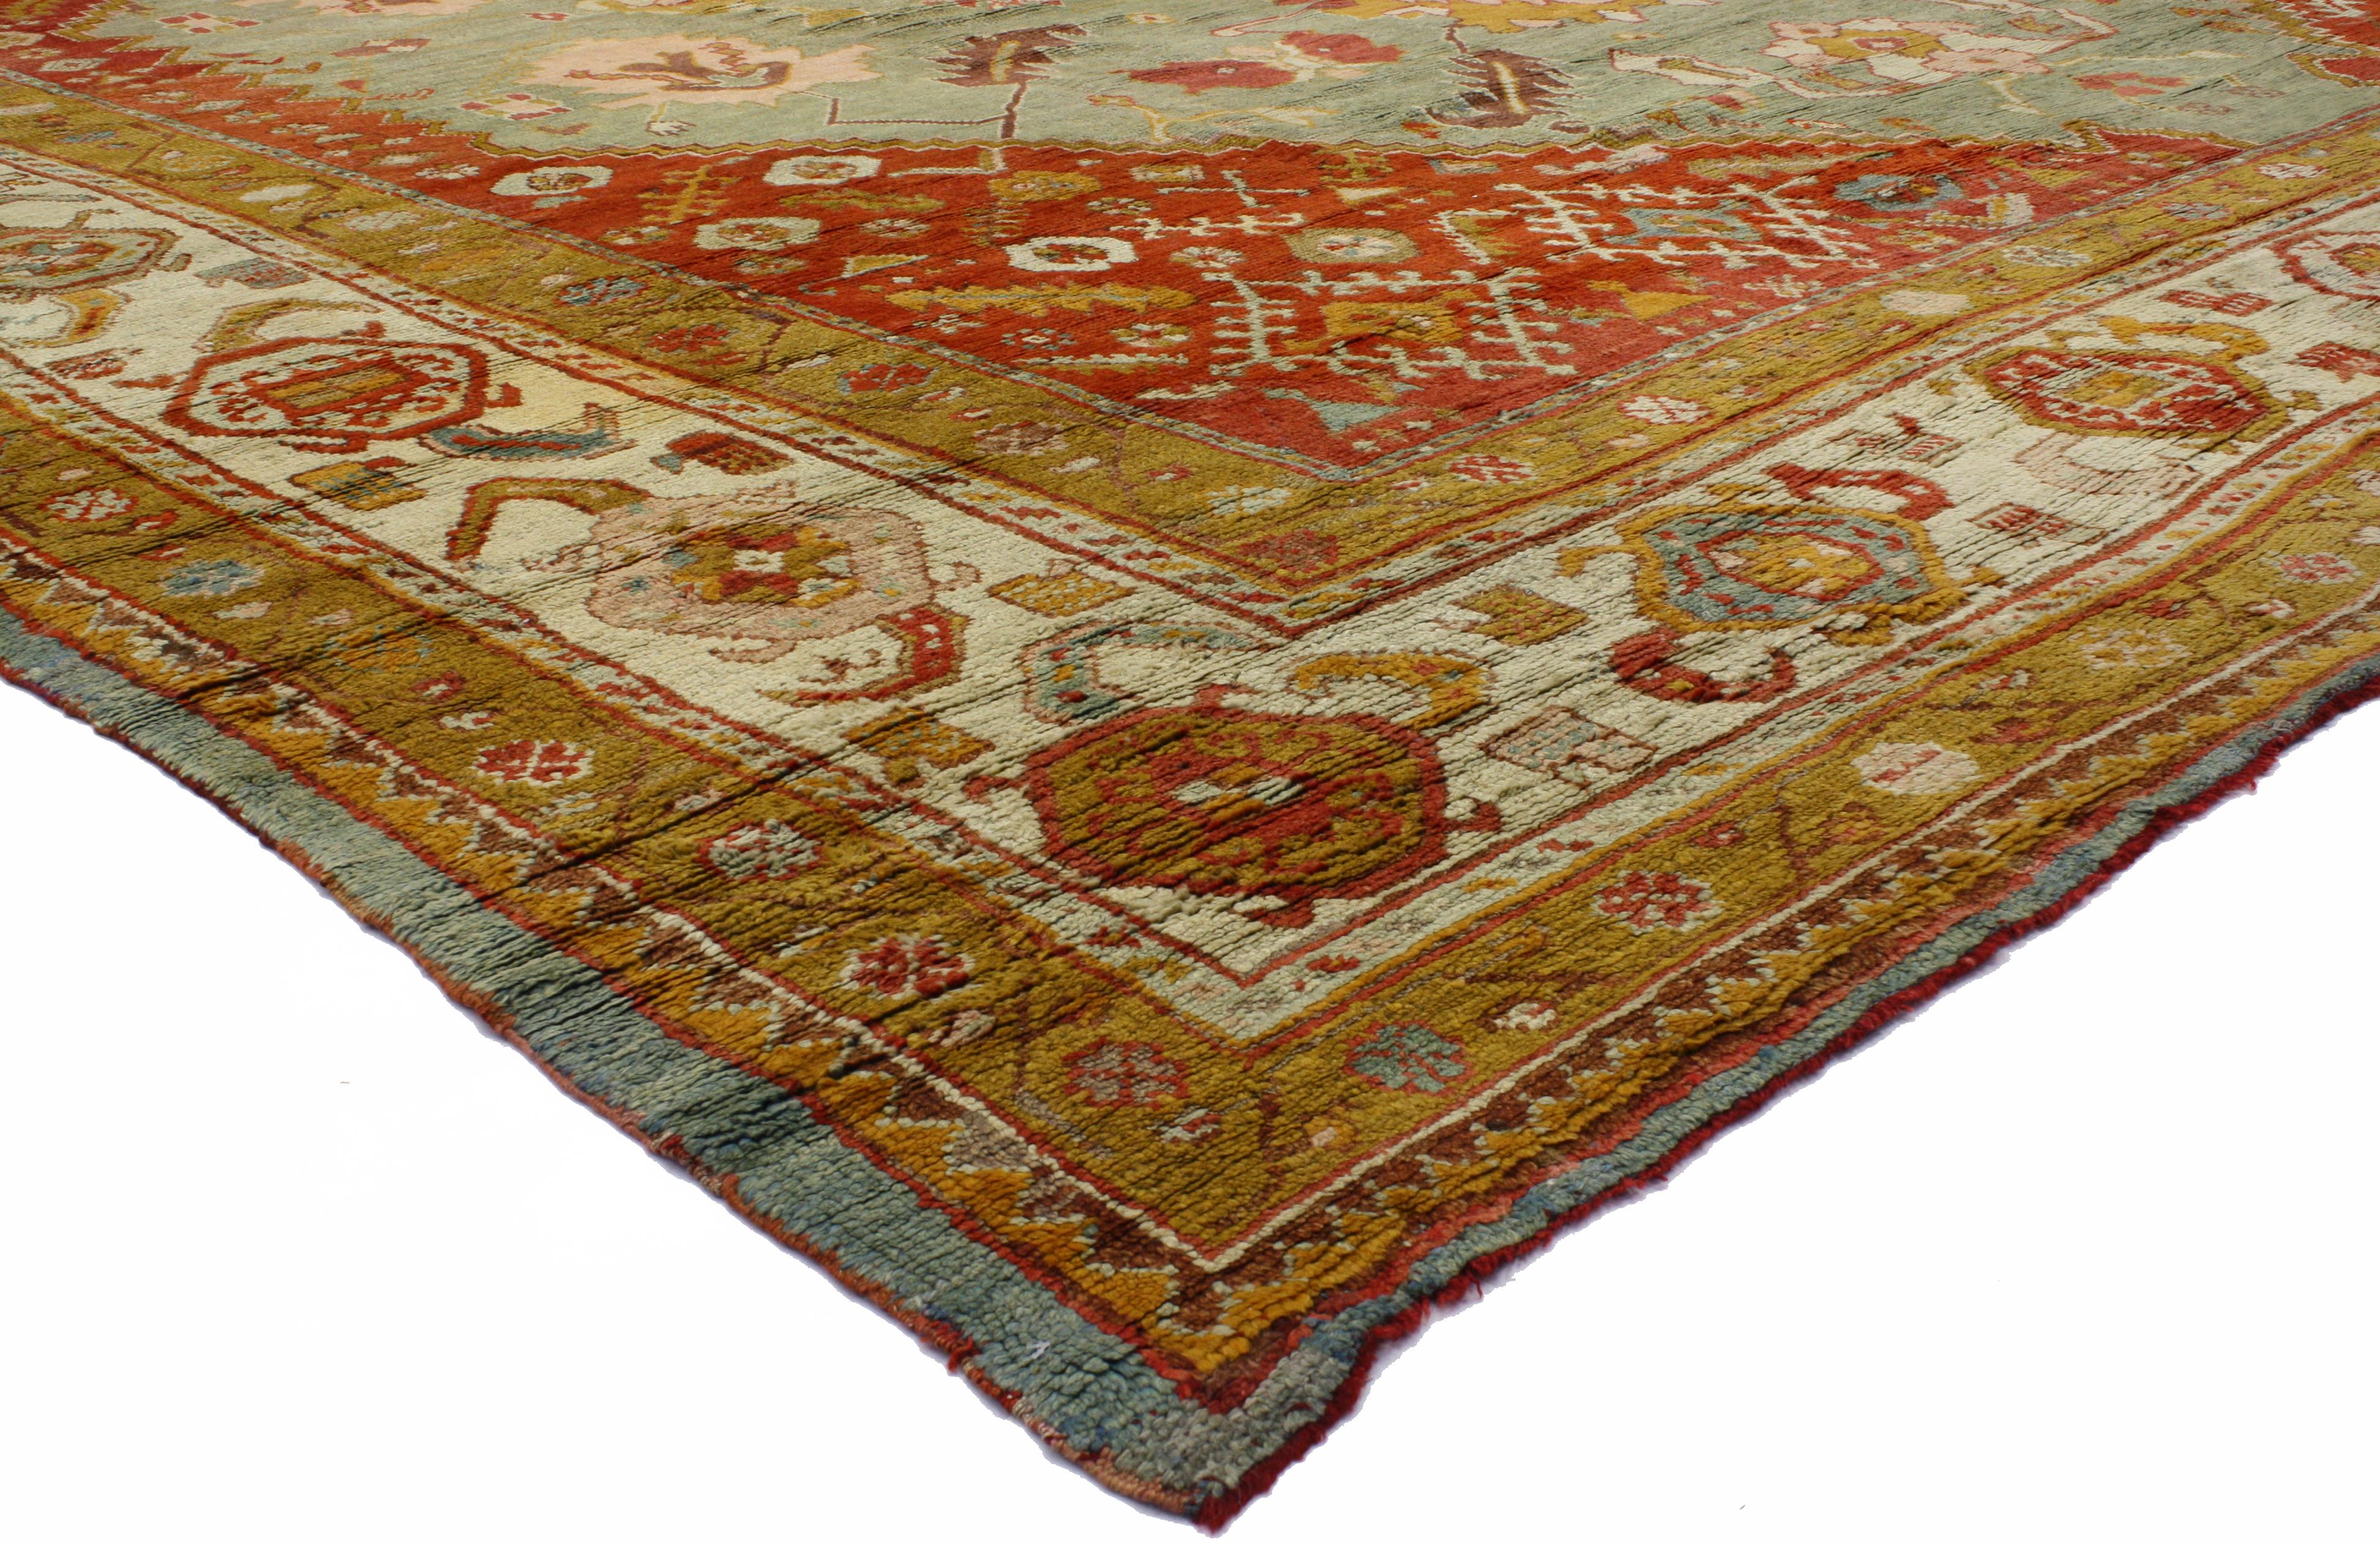 73047 Antique Turkish Oushak Oversize Rug with Traditional Style and Modern Design 16' x 19'. A colorful hand-knotted antique Turkish Oushak carpet featuring vibrant colors of rustic orange, golden saffron yellow, misty mint, cream beige, ice blue